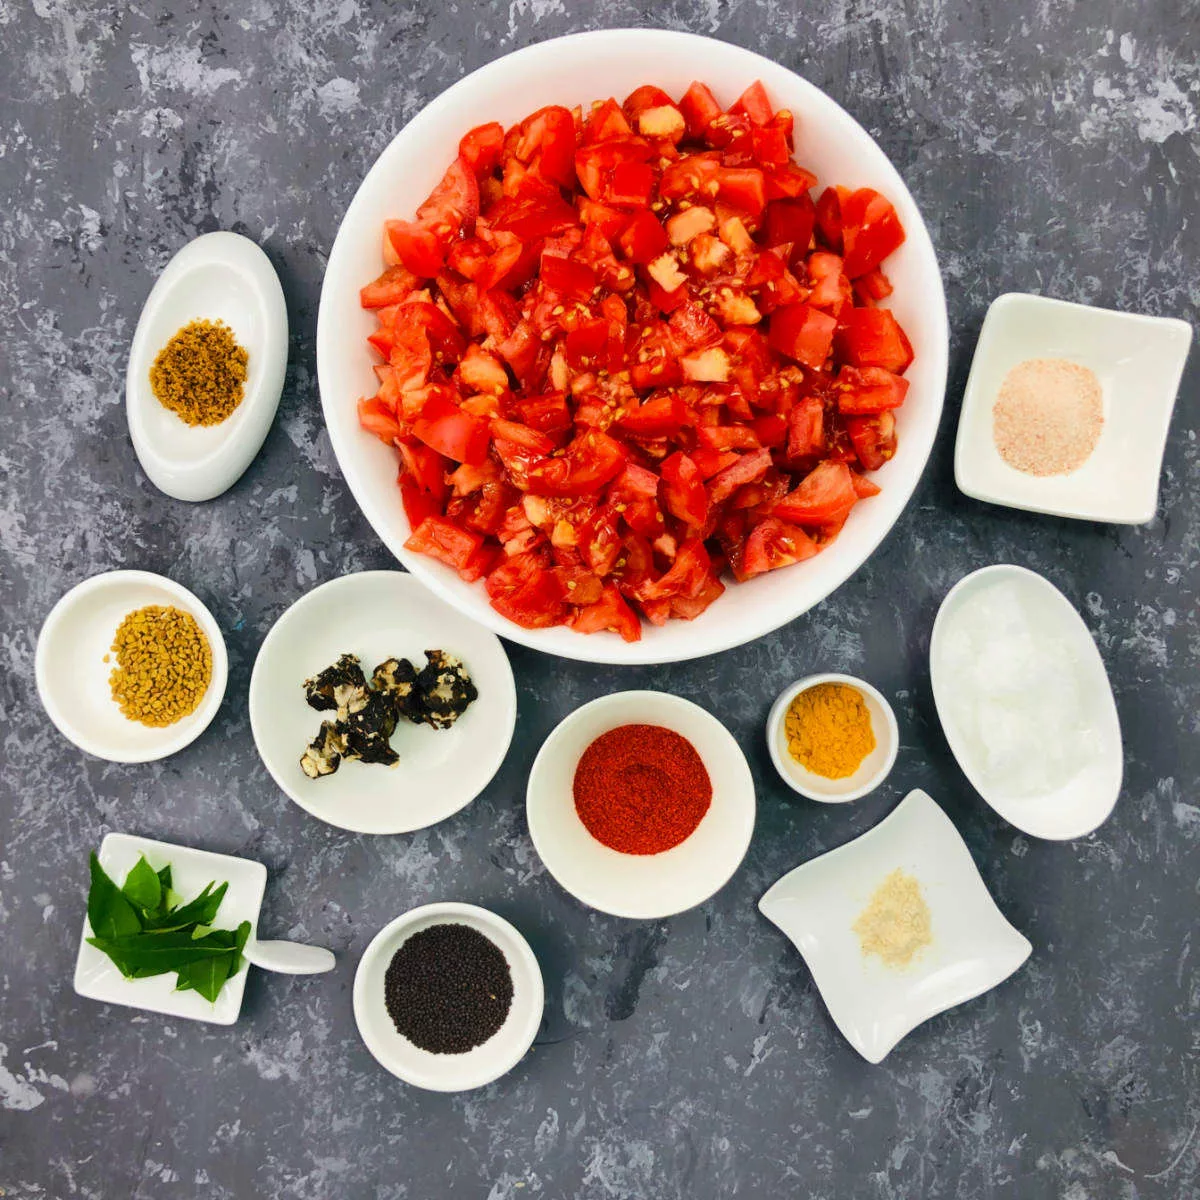 Tomato pickle ingredients.